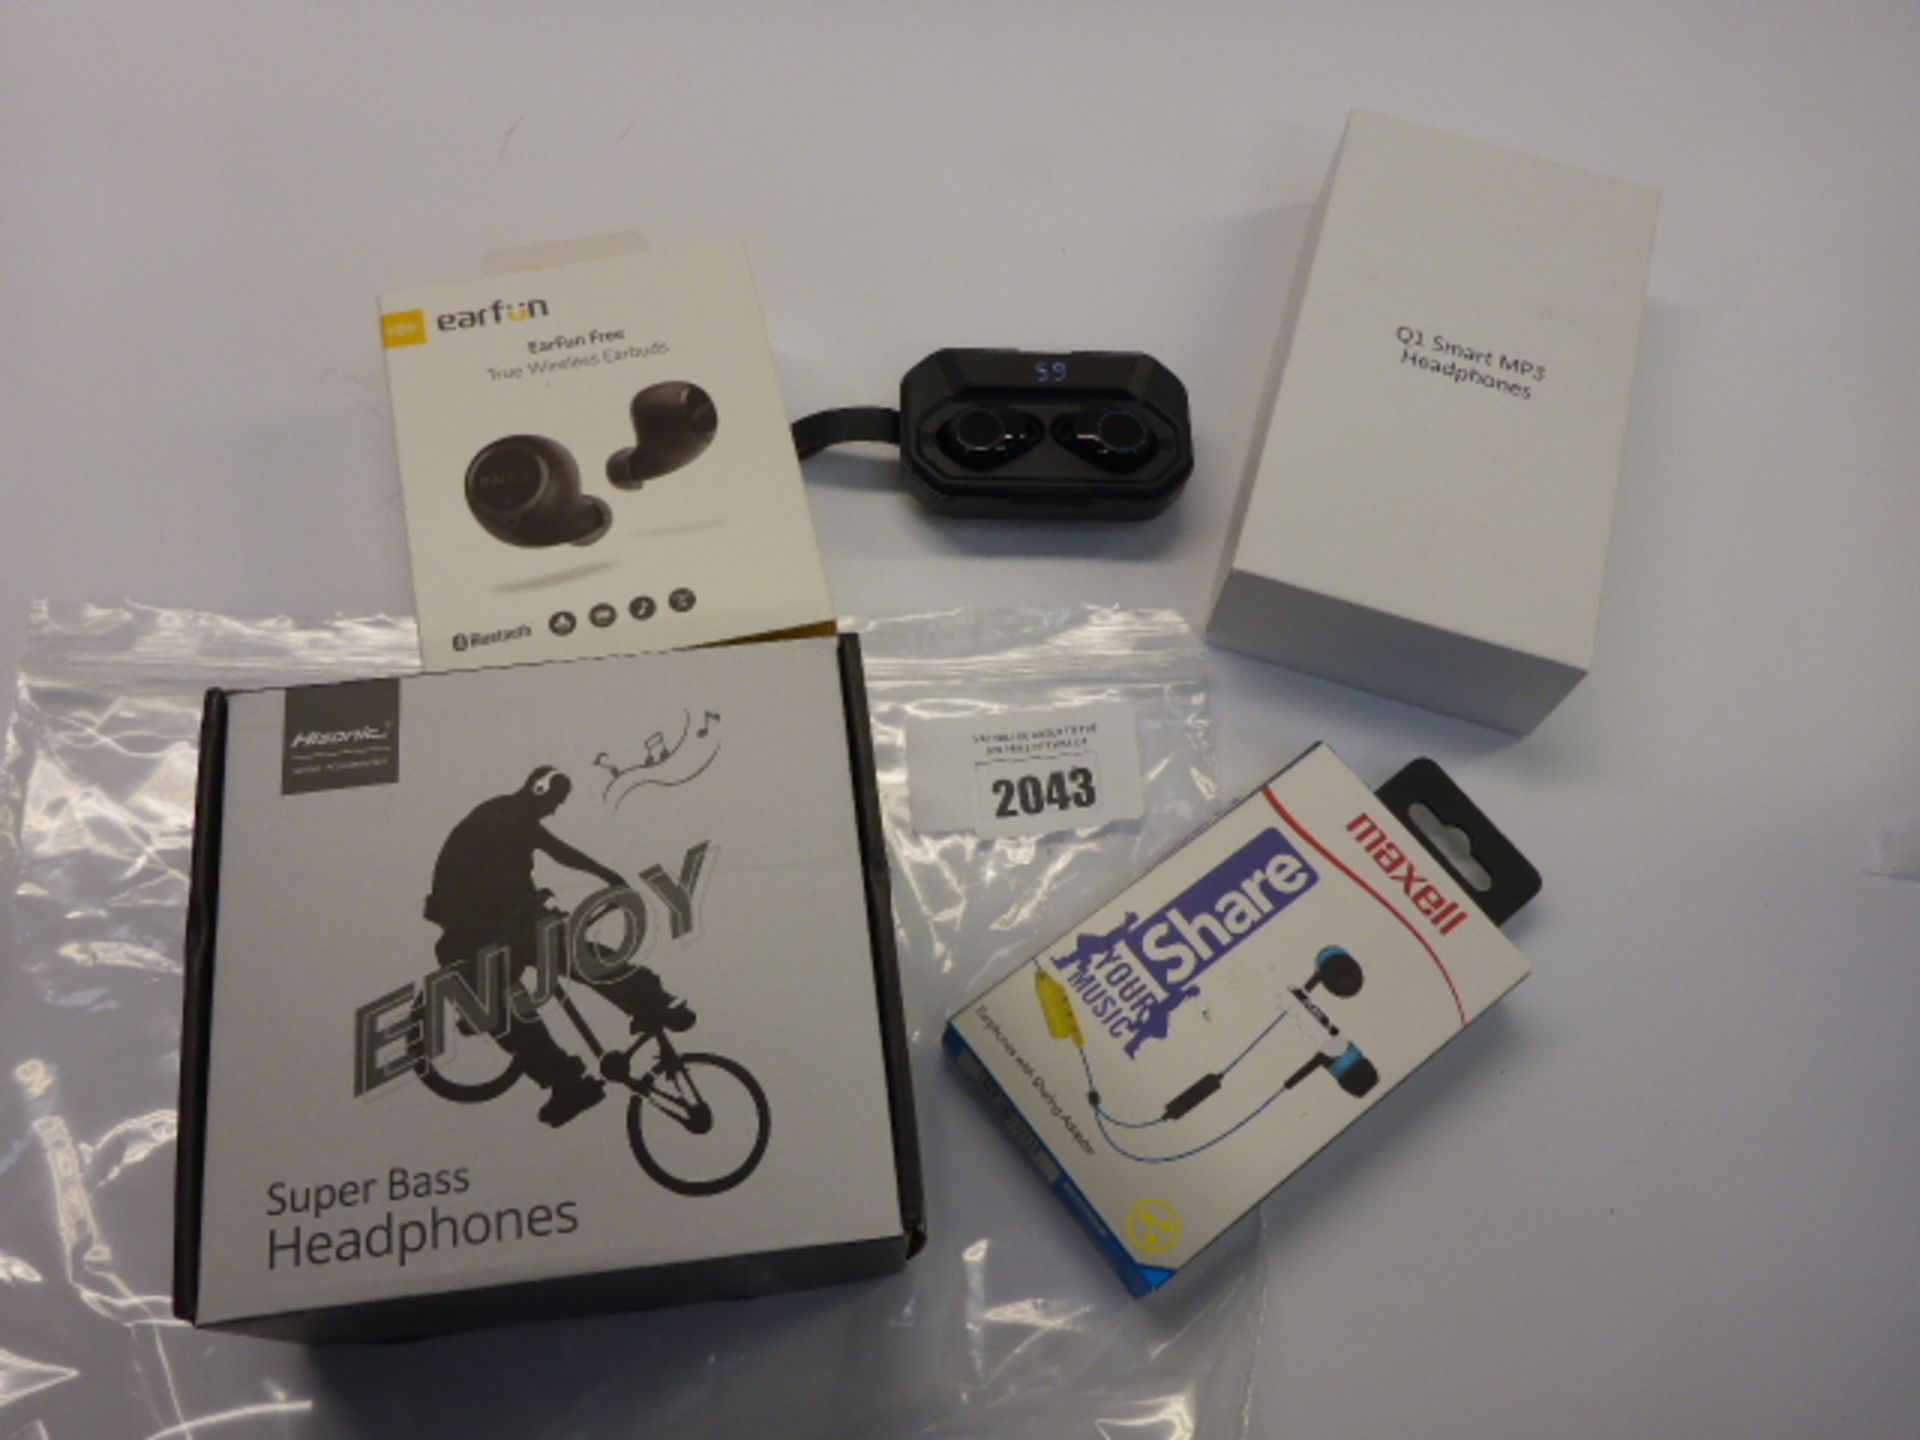 Headphones and various wireless earbuds sets, by Maxwell, Earfun, etc.